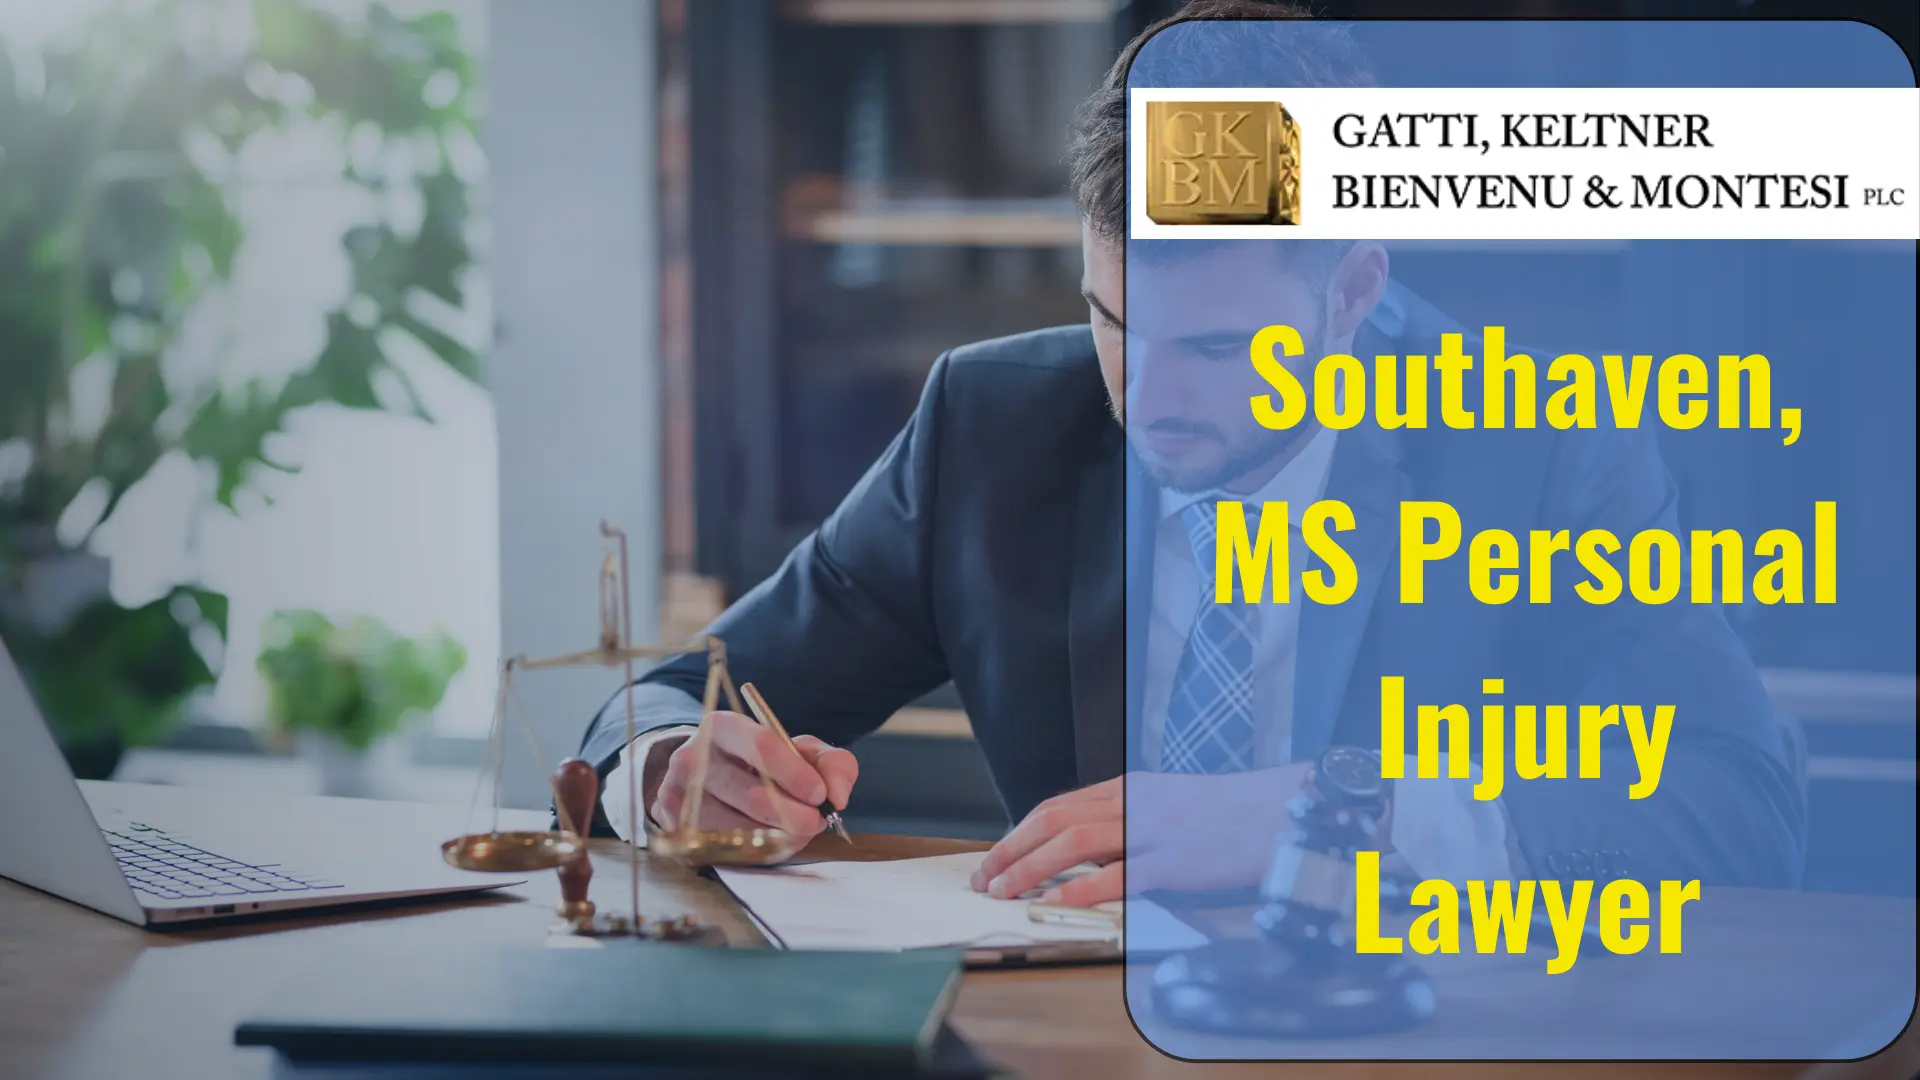 Southaven, MS Personal Injury Lawyer